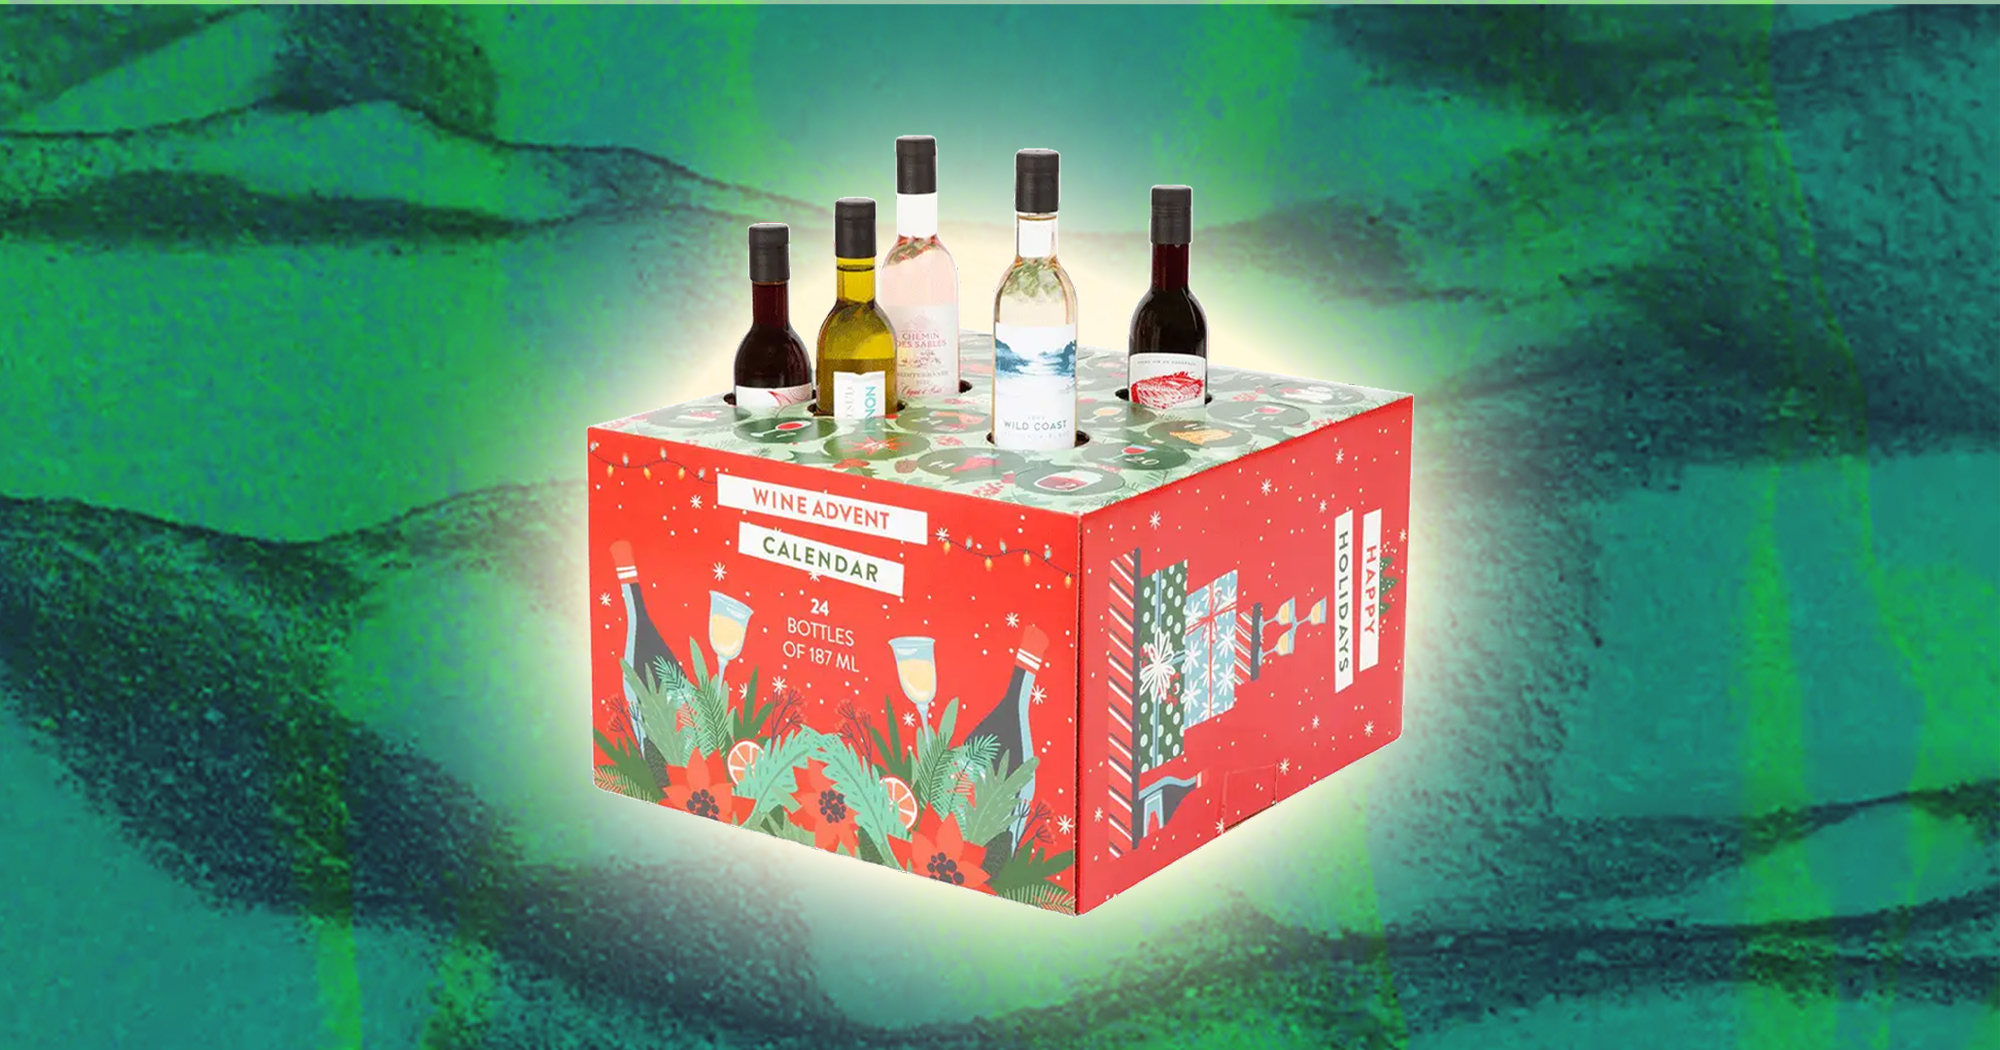 5 Best Wine Advent Calendars For Spreading Holiday “Cheers!”